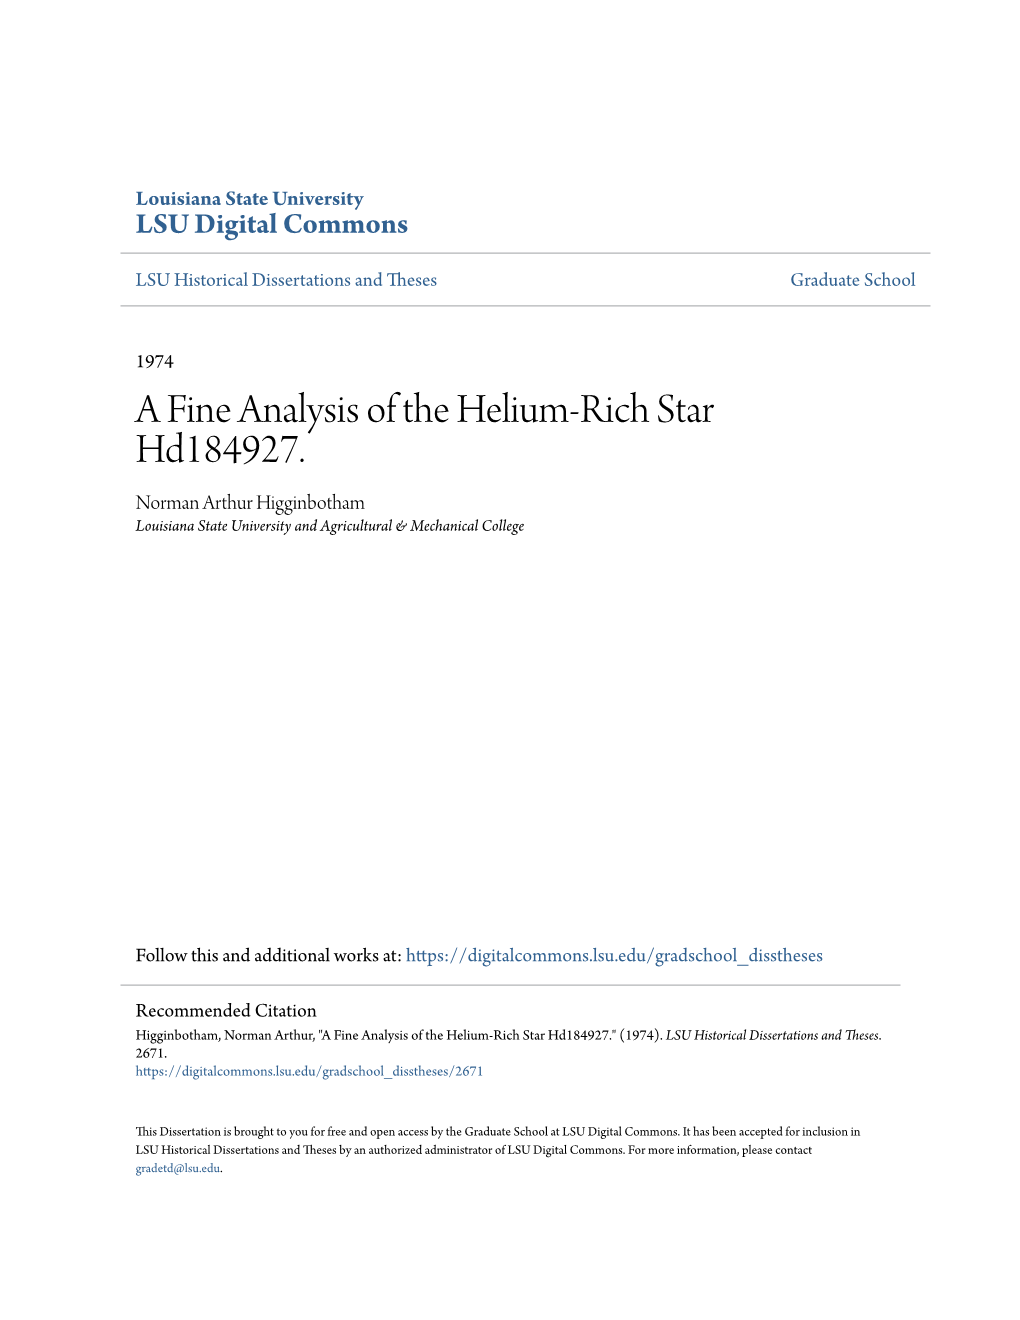 A Fine Analysis of the Helium-Rich Star Hd184927. Norman Arthur Higginbotham Louisiana State University and Agricultural & Mechanical College